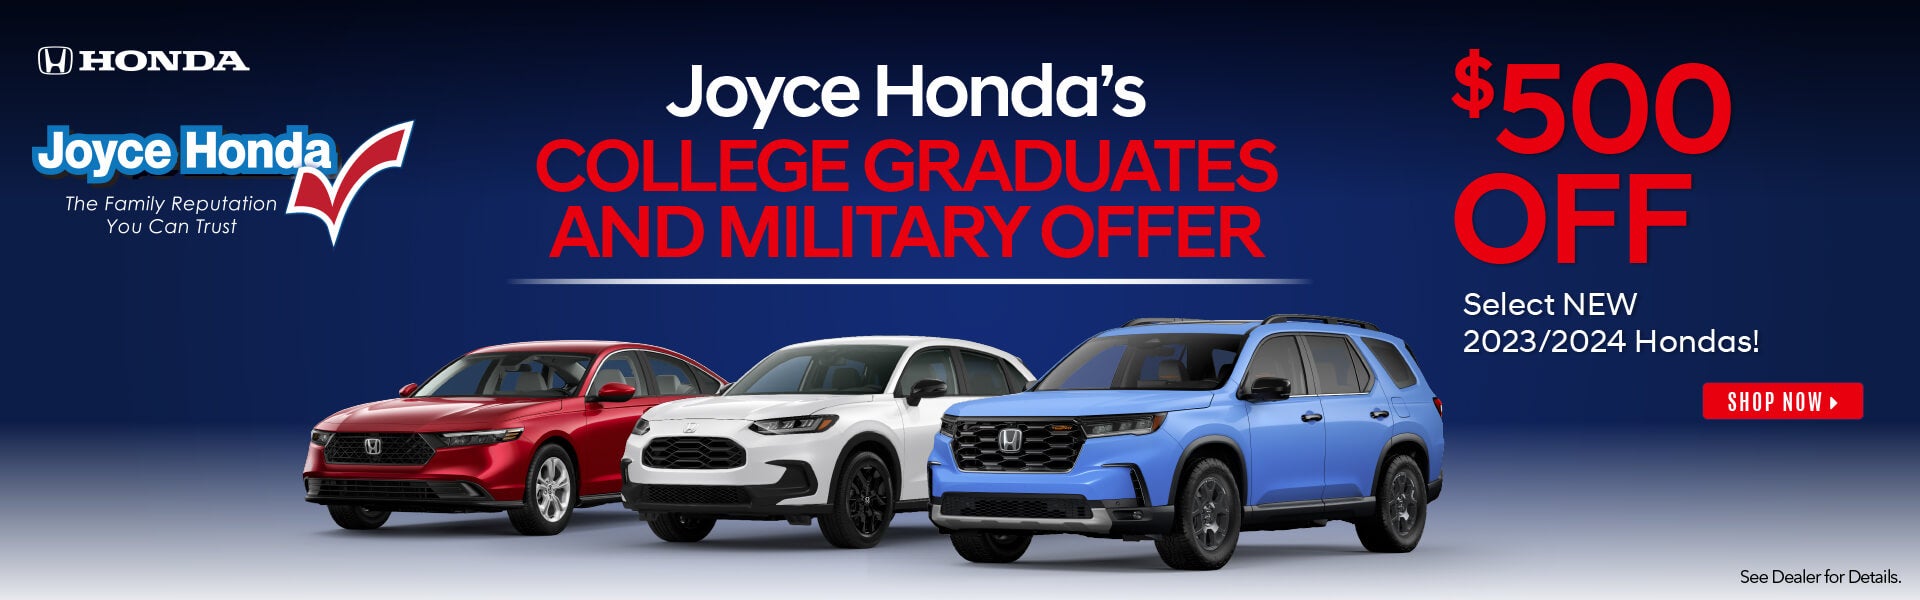 College Grad and Military Offer $500 off